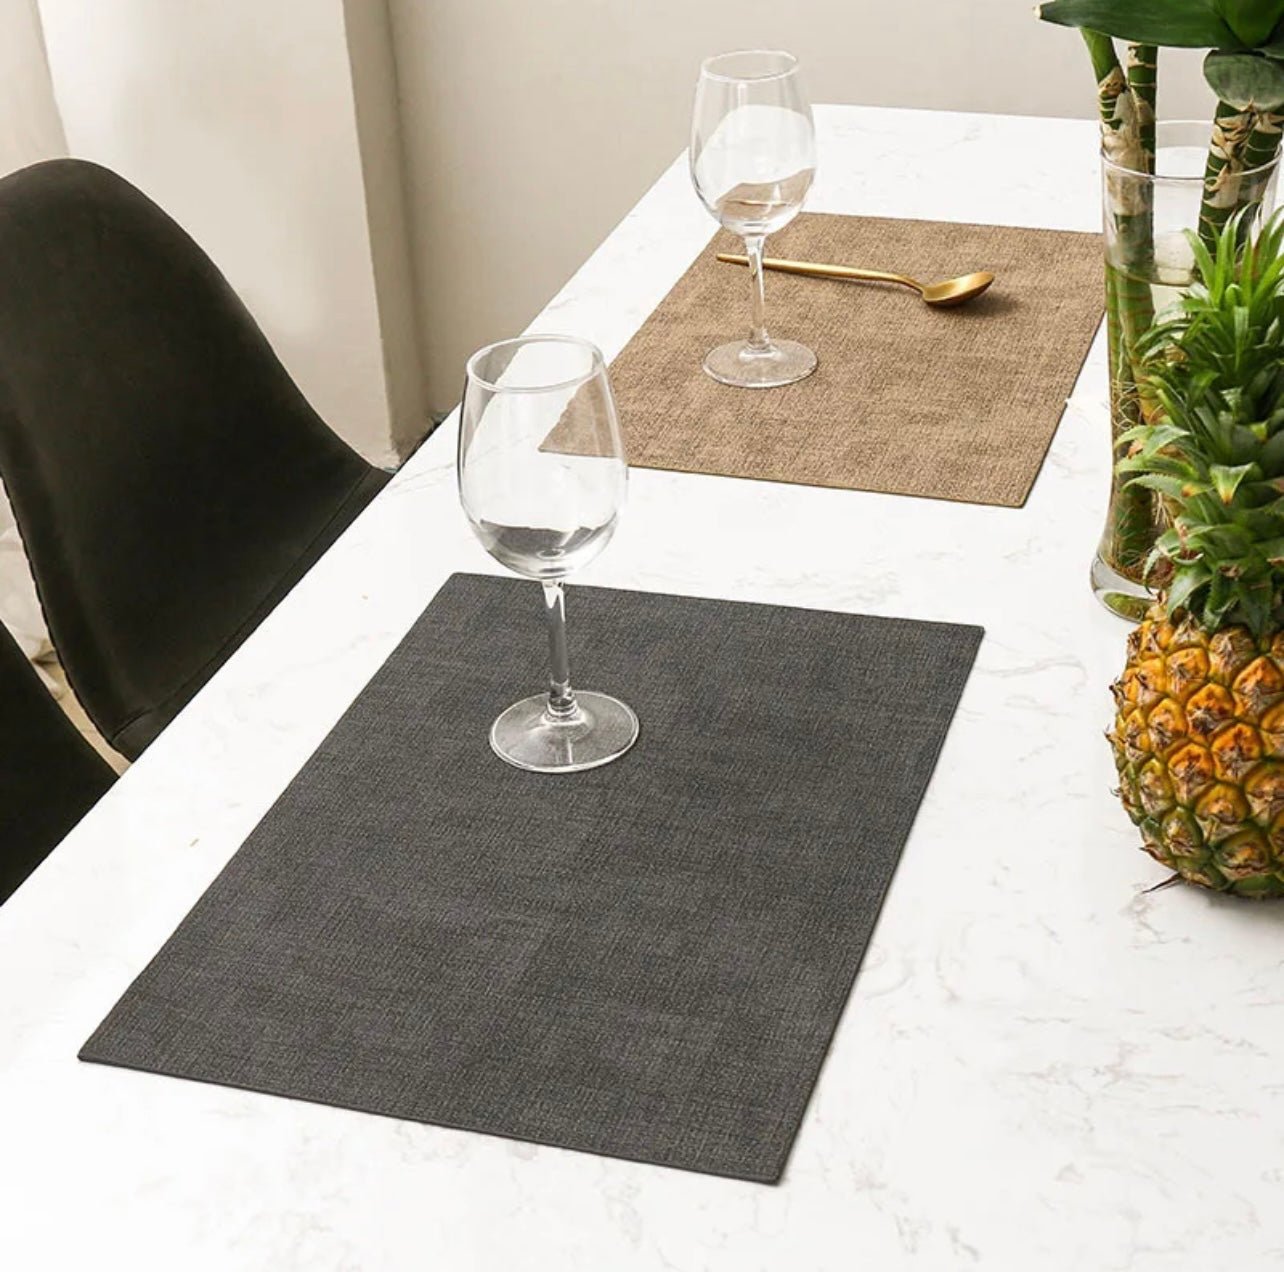 Moroccan Placemat - Buy Placemats Online at FRANKY'S